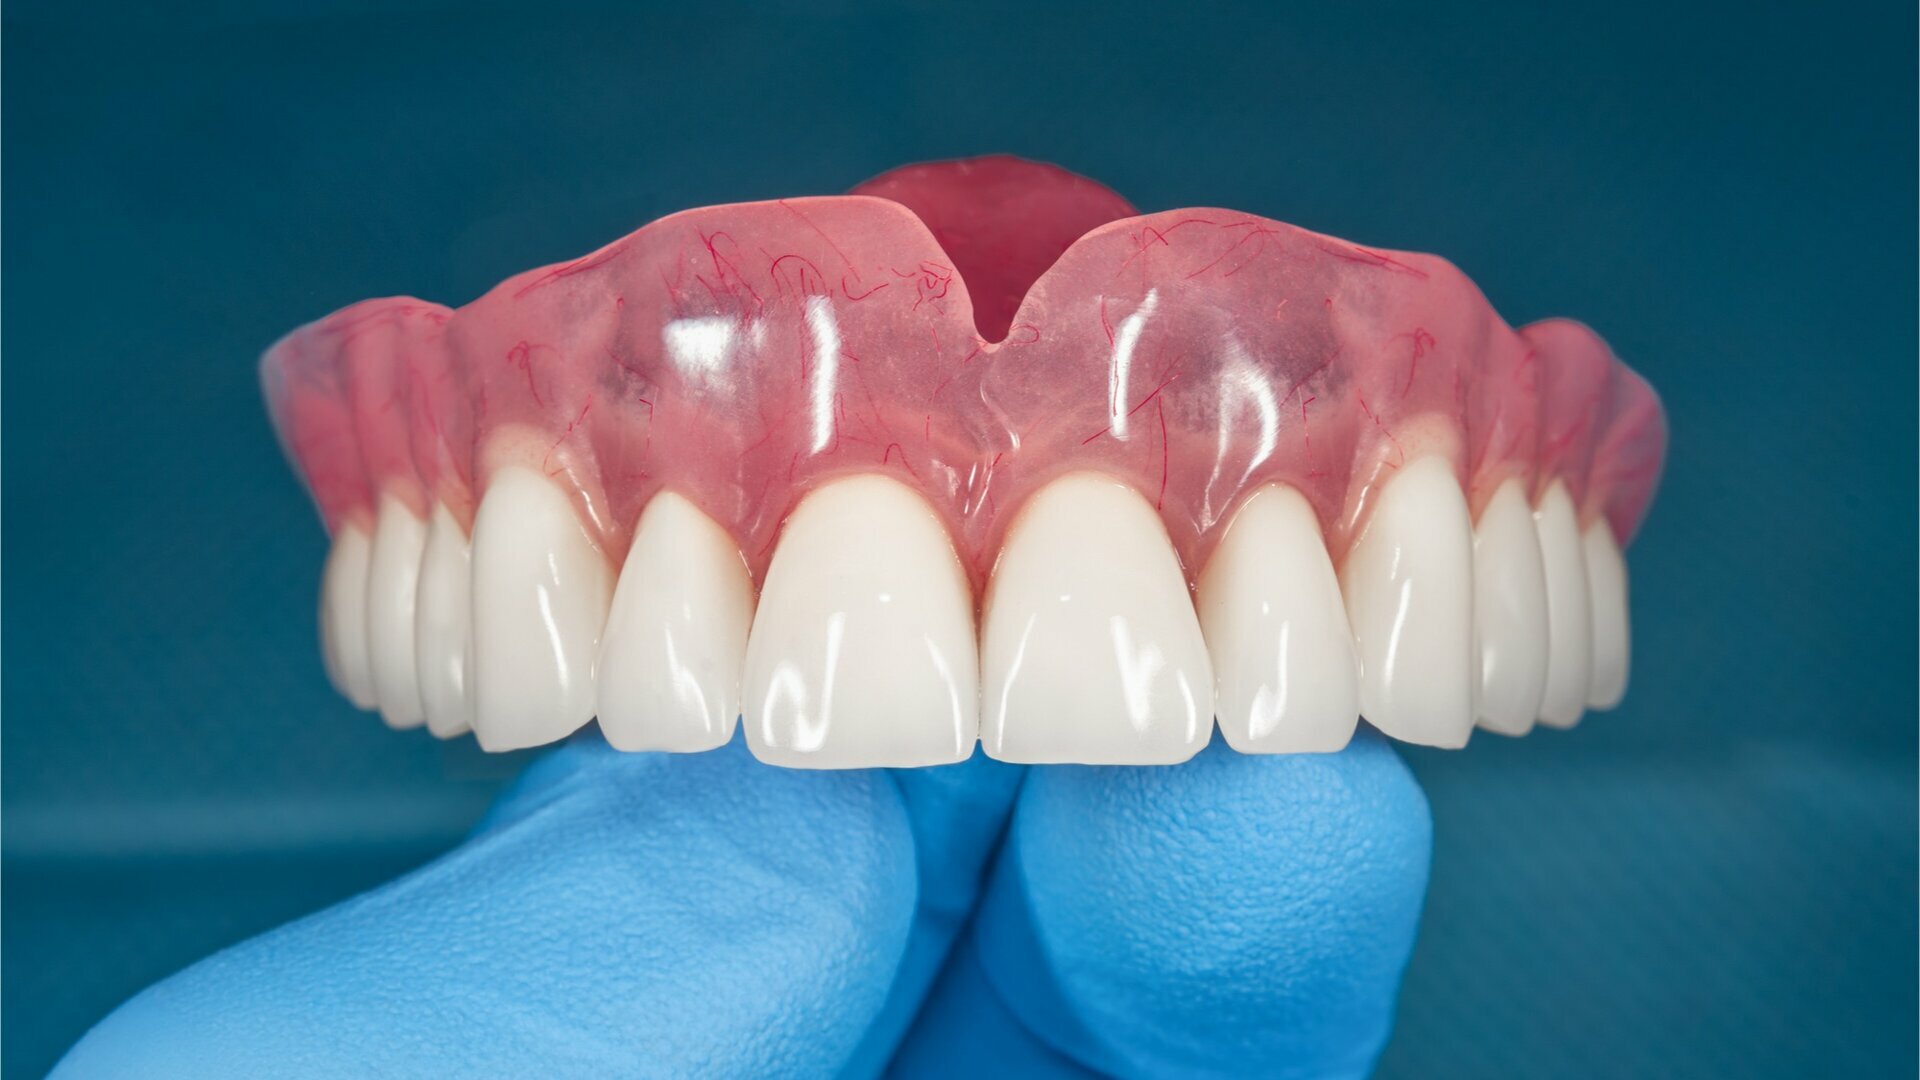 The future is now: Revolutionising dentistry with digital dentures